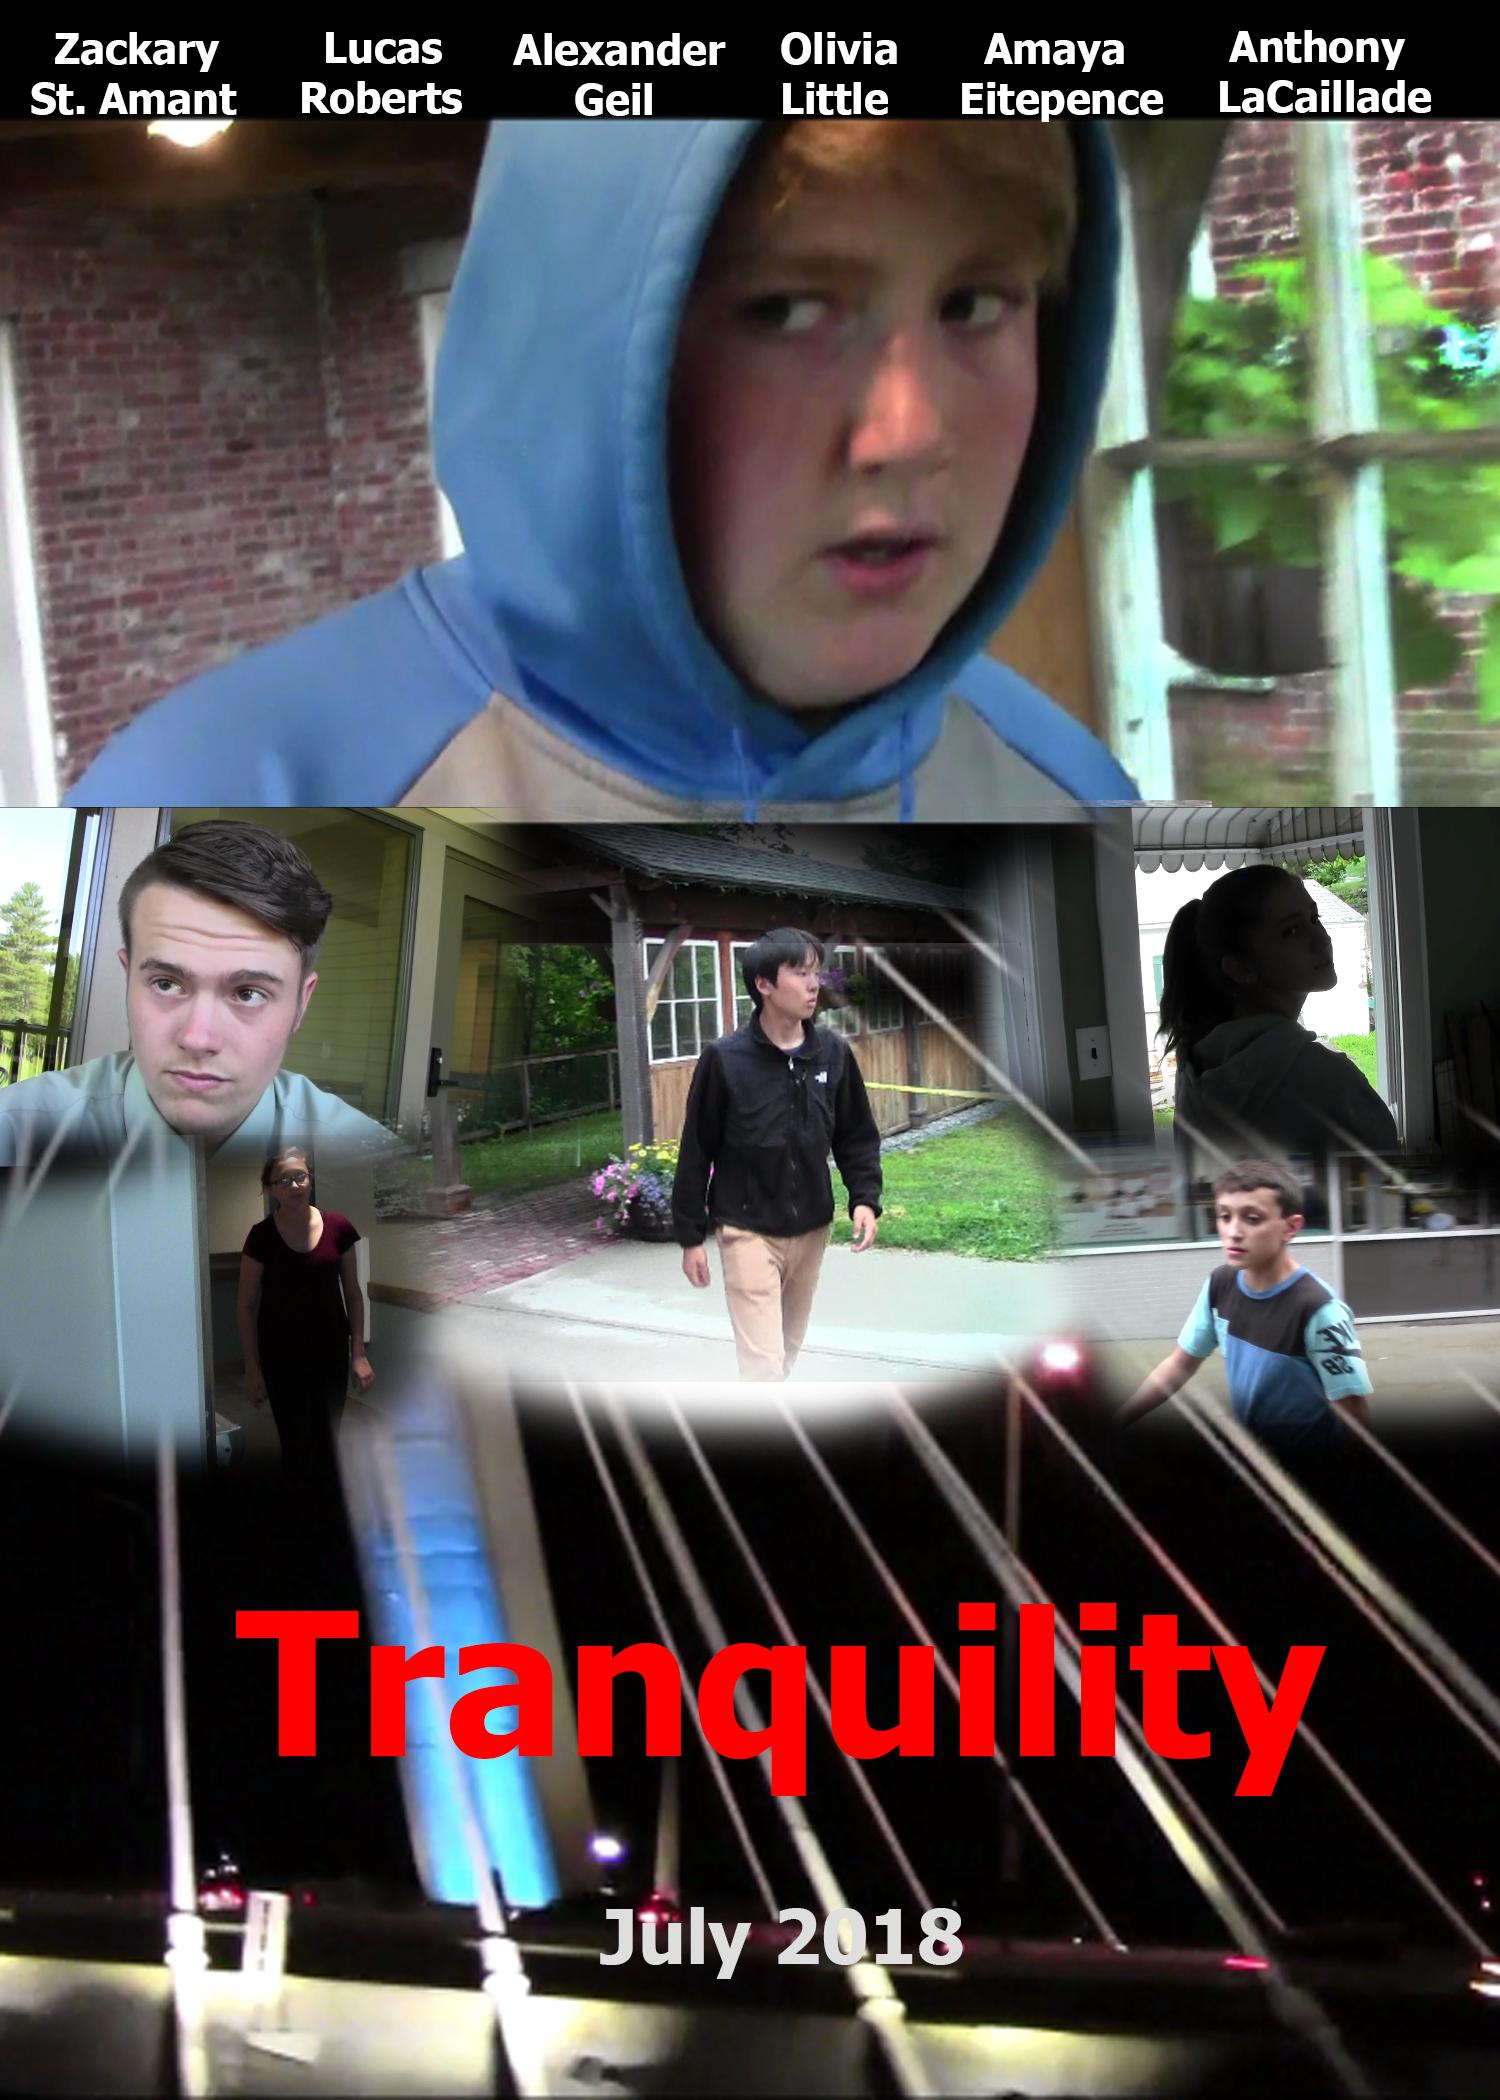 Tranquility - An Independent Espionage/Crime Film